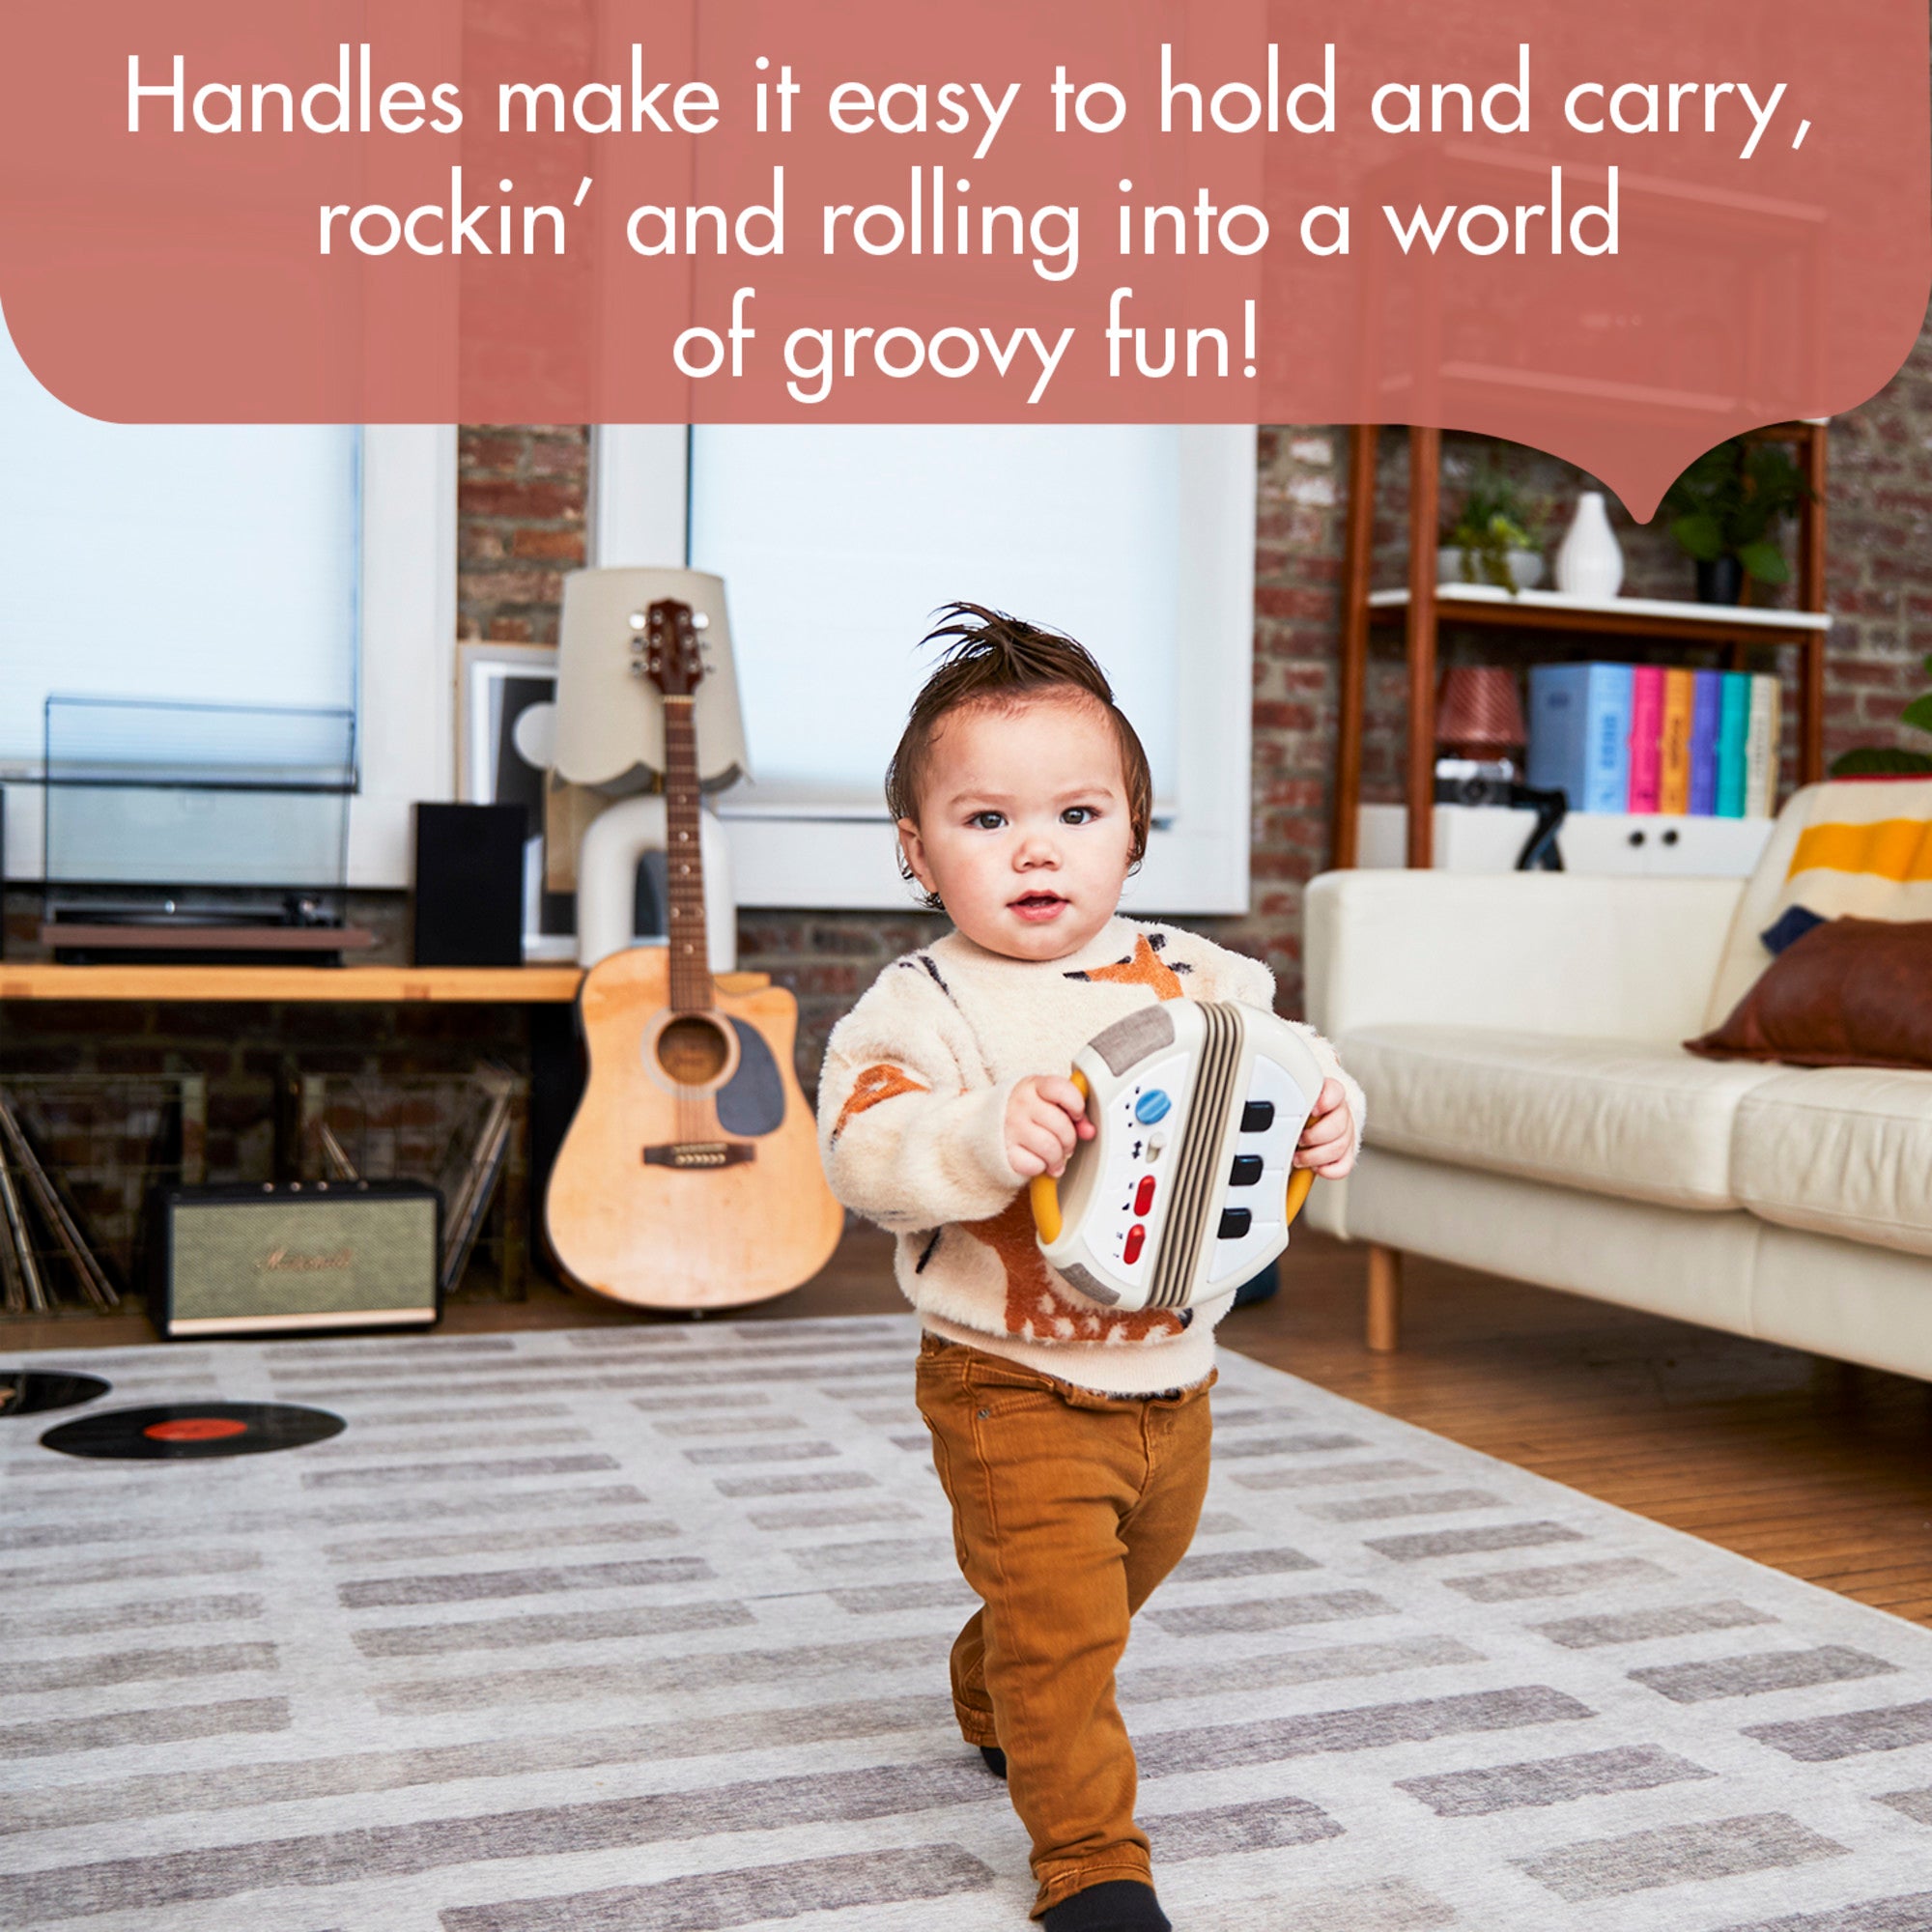 Tiny Rockers Accordion - Handles make it easy to hold and carry, rockin' and rolling into a world of groovy fun!